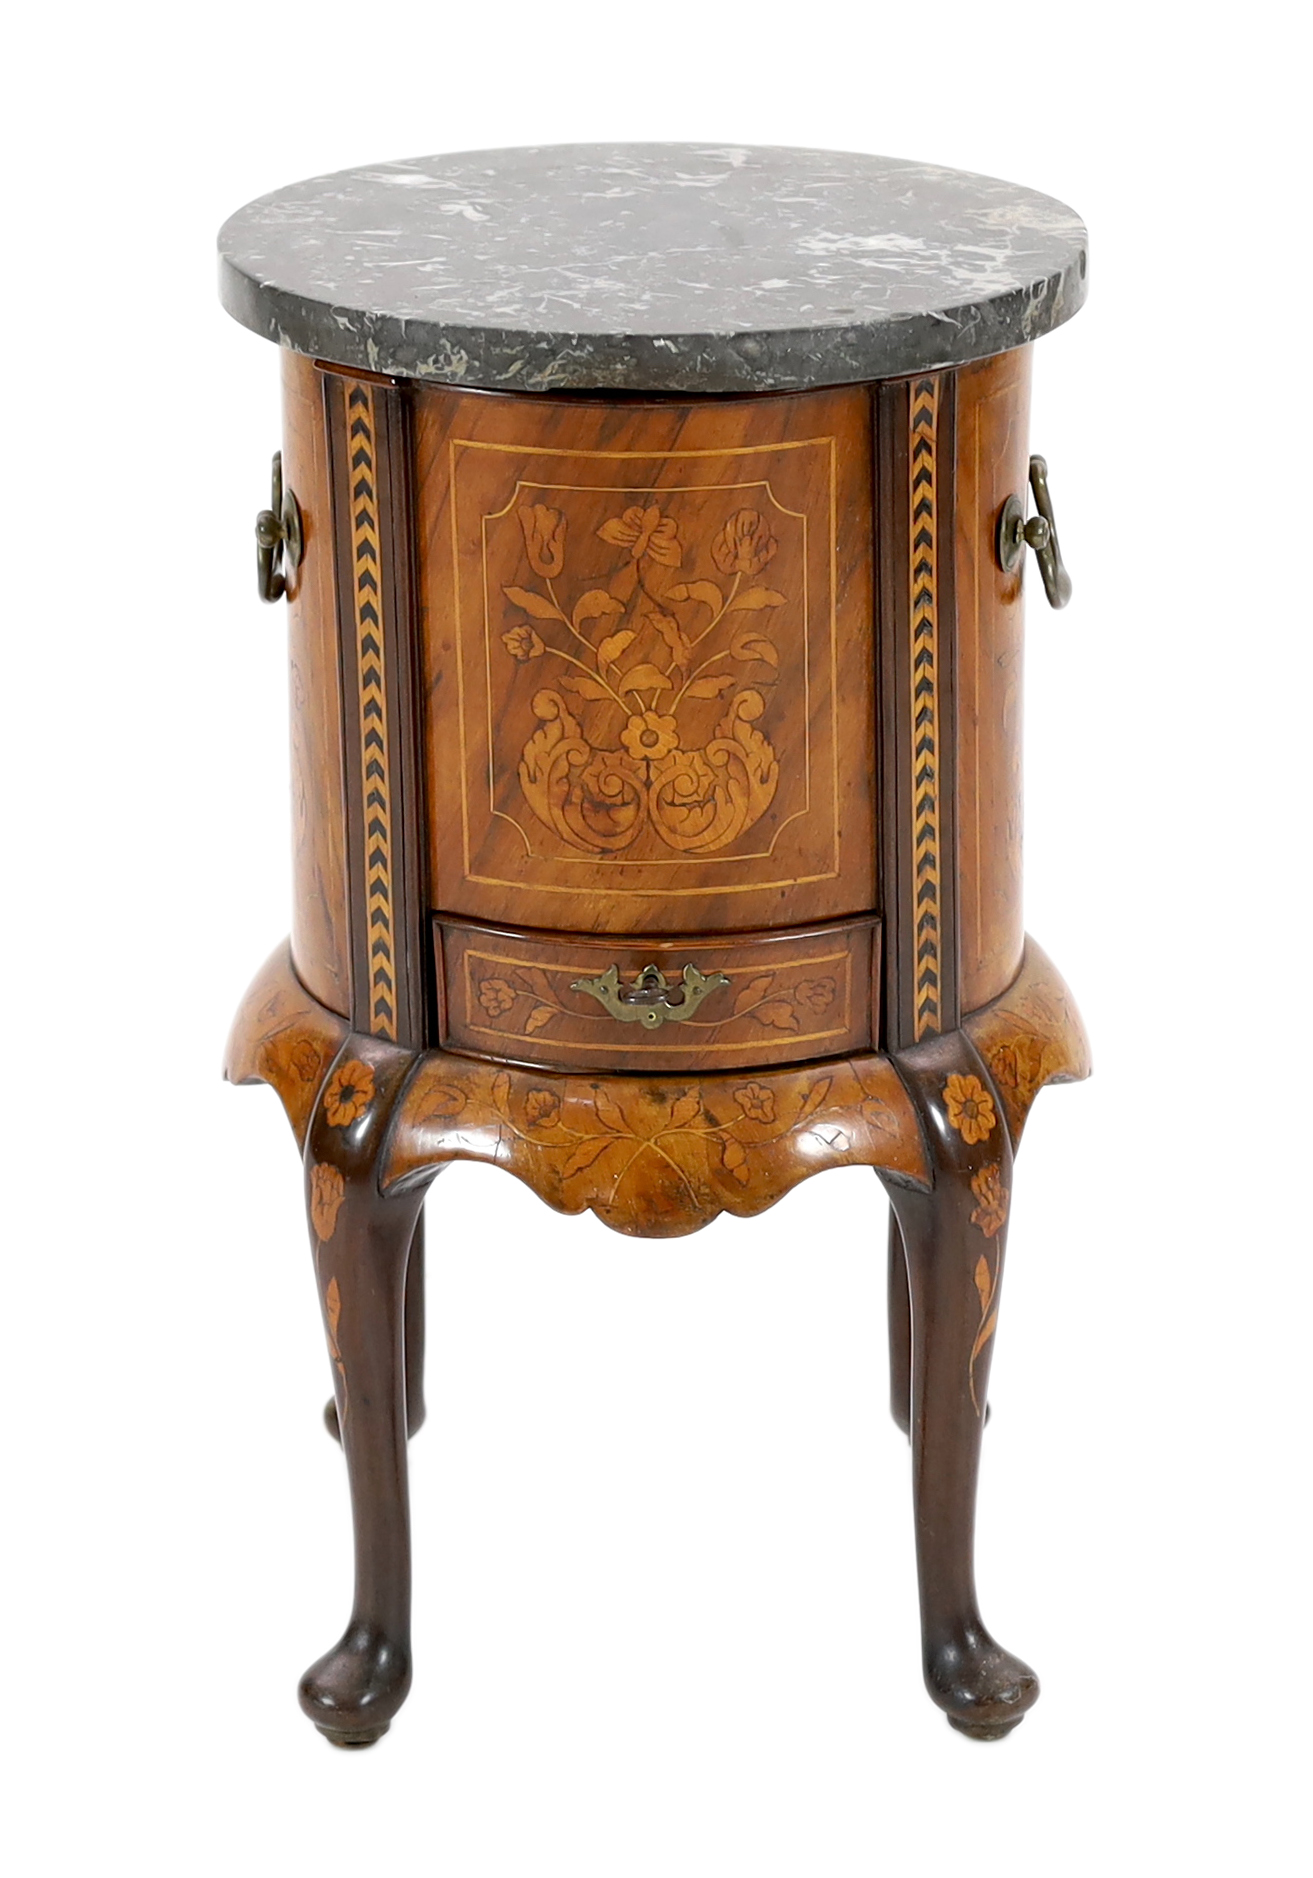 *A late 18th century Dutch floral marquetry inlaid walnut wine cooler, with brass loop side